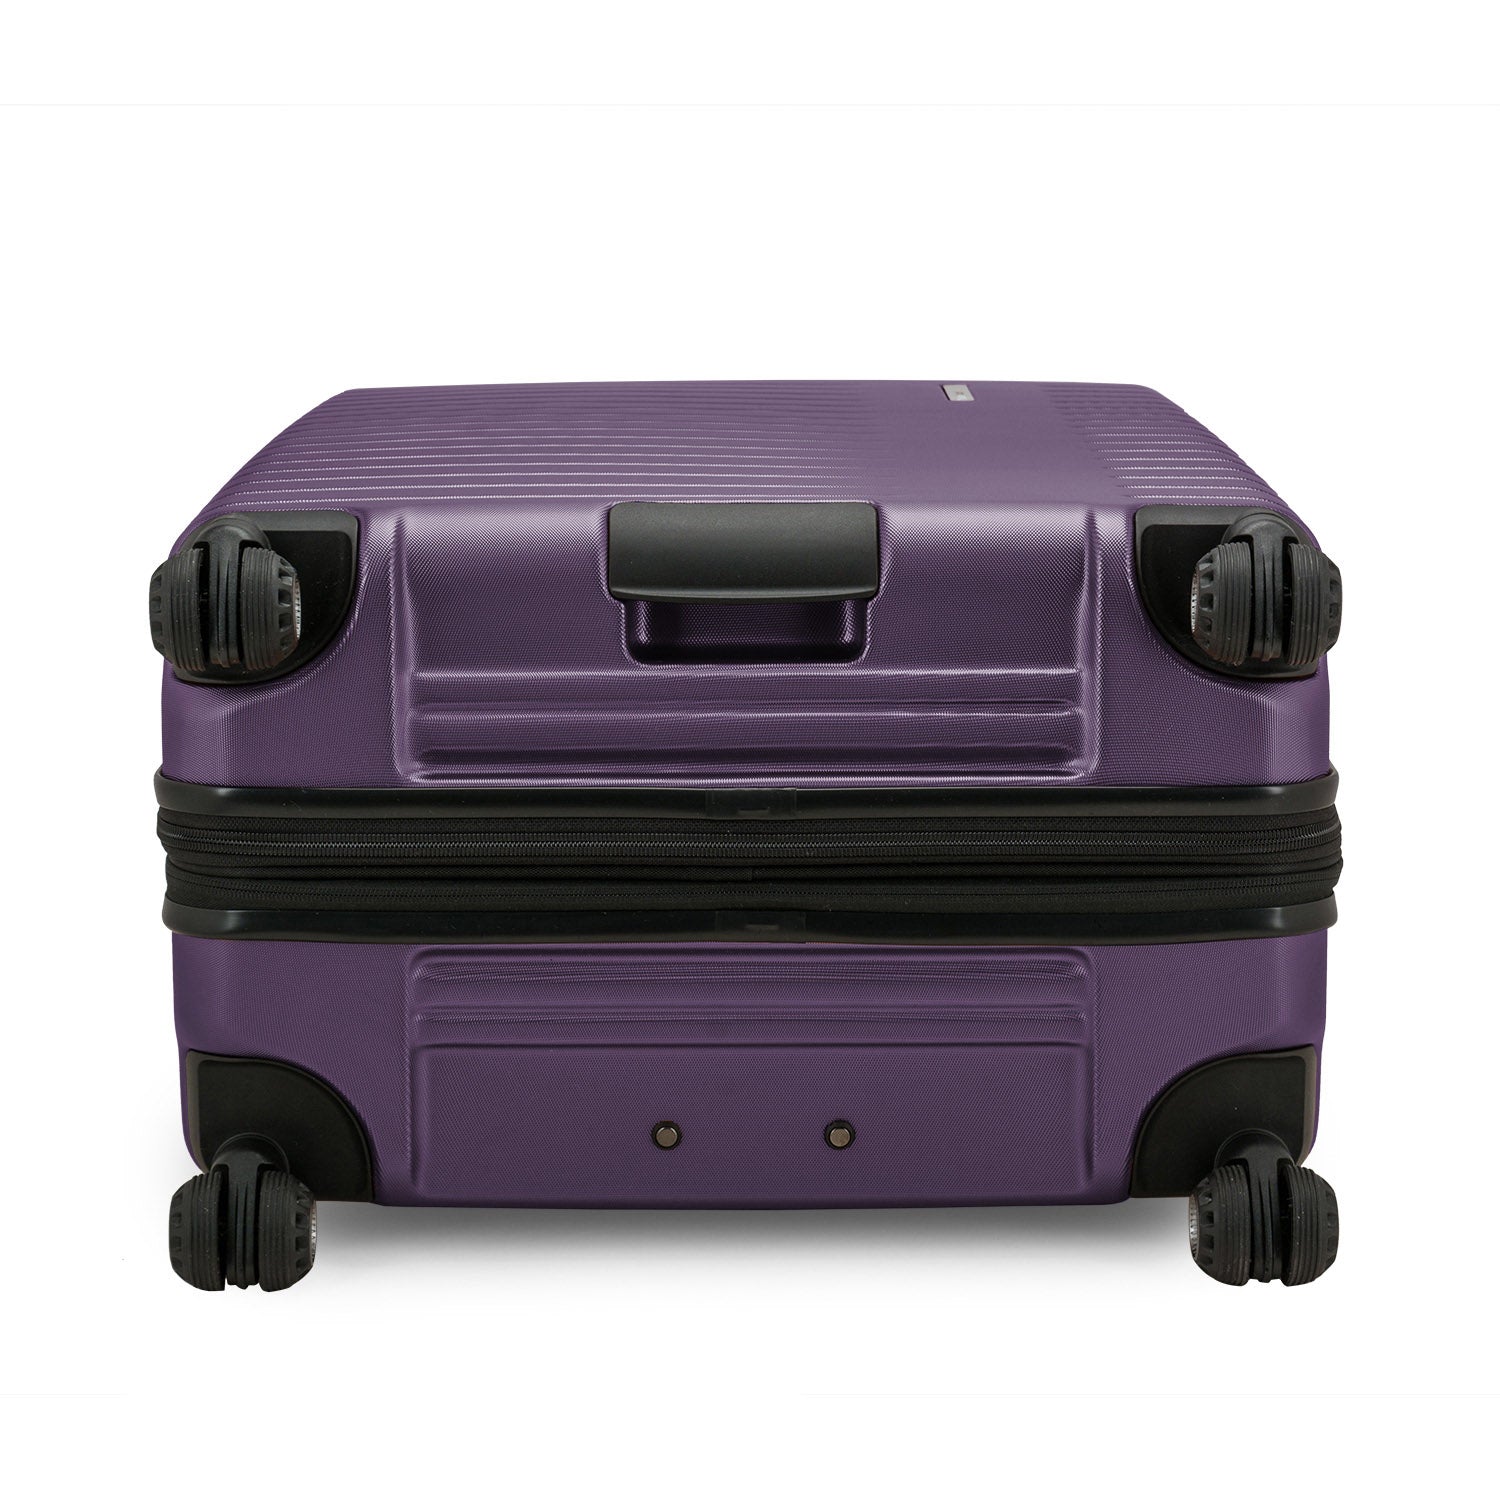 An image of bottom Archer Large Checked Luggage Suitcase Piece with 4 Spinner Wheels